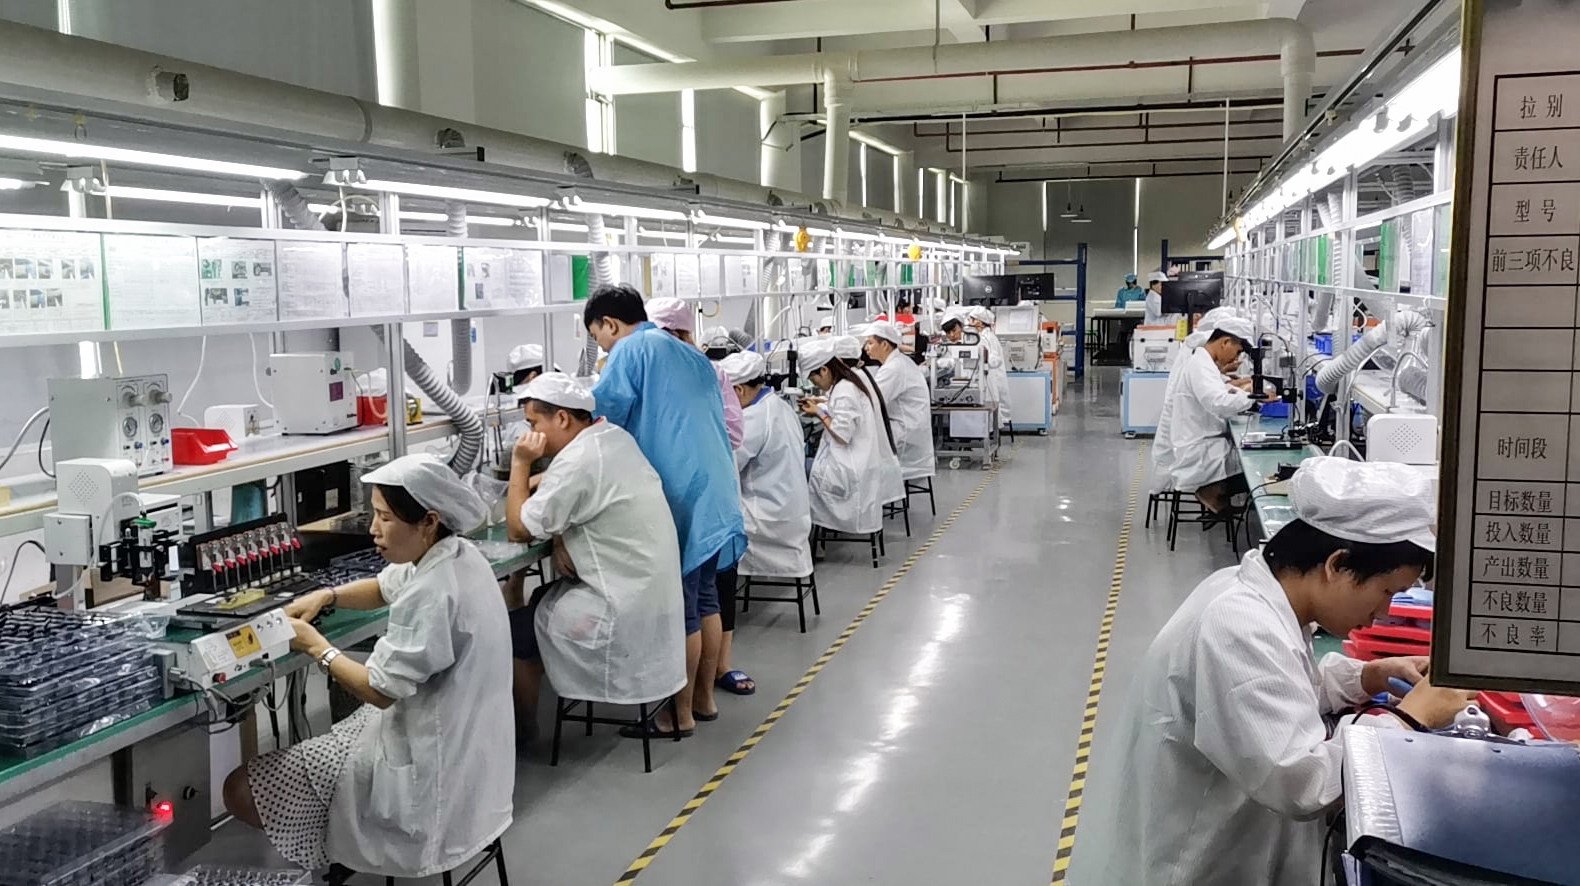 A production line inside the factory of Dongguan Koppo Electronics Co, a major Bluetooth headphone maker in China. Photo: Handout